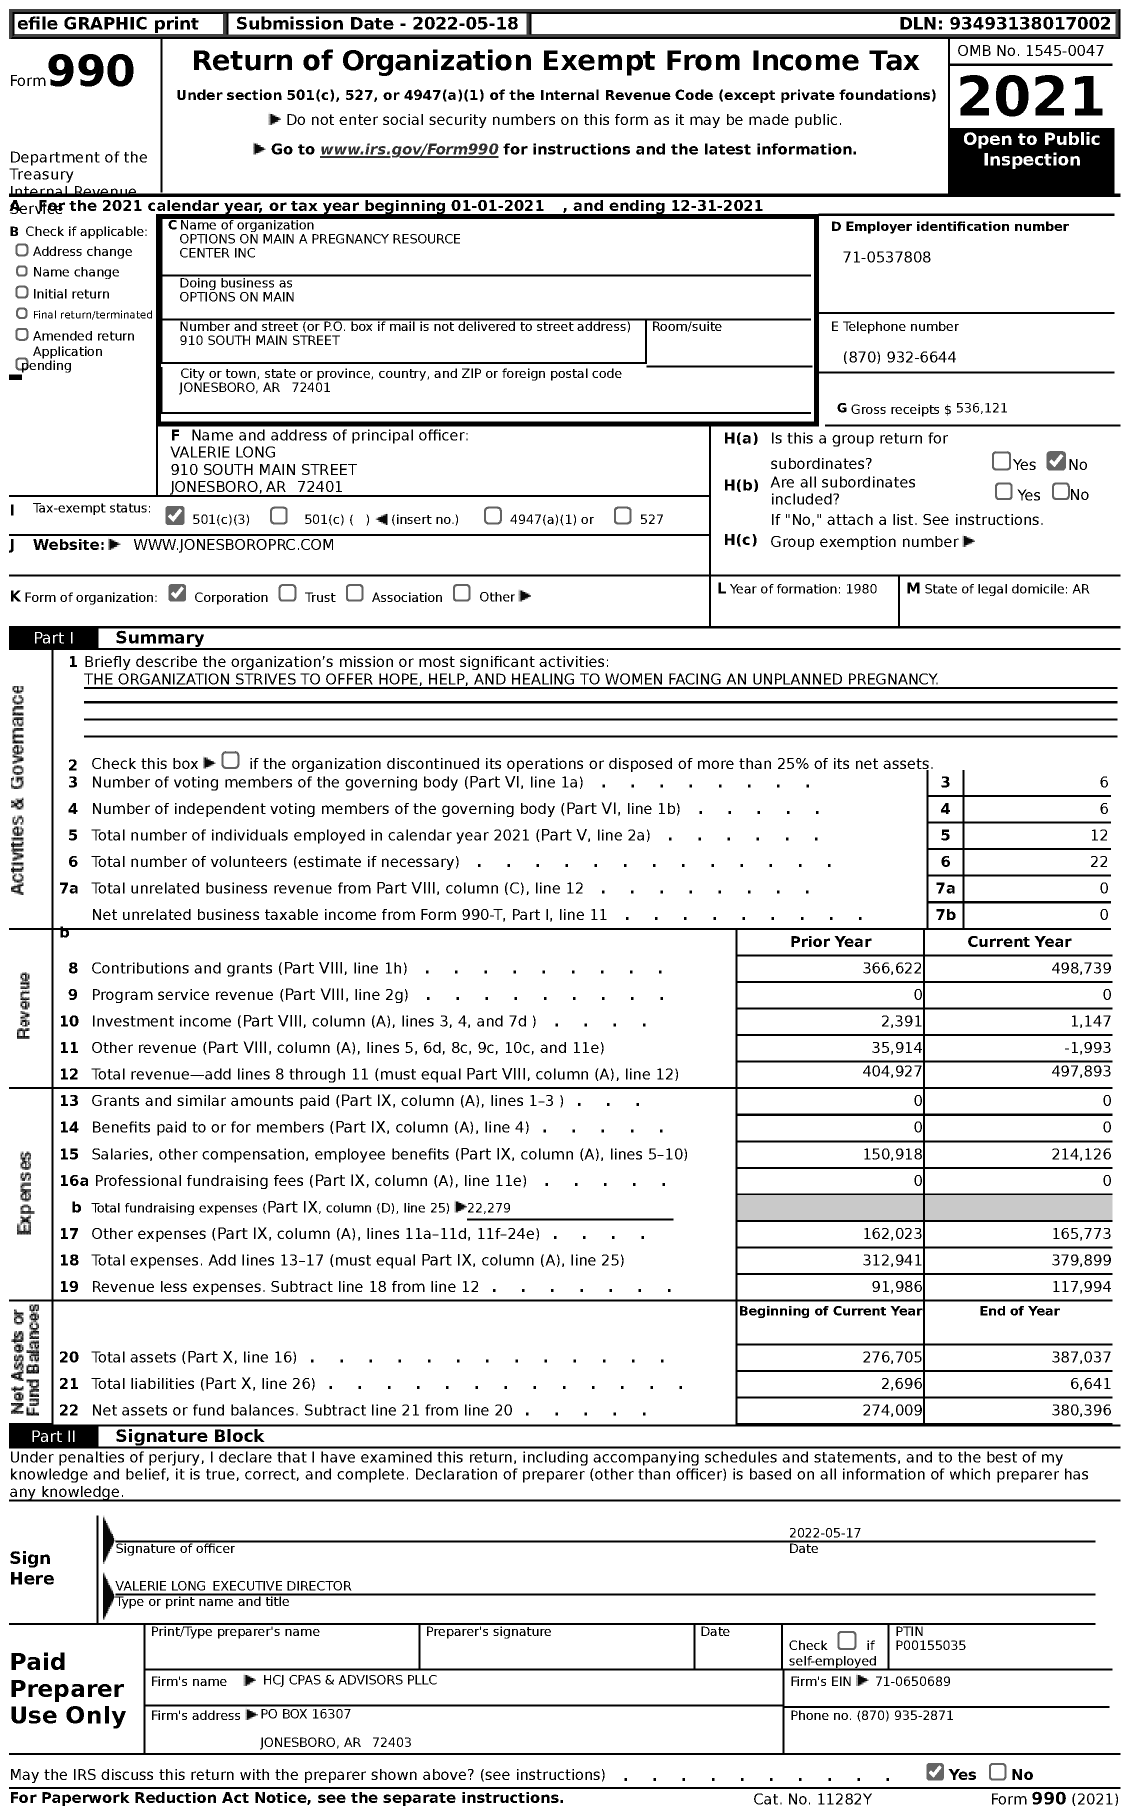 Image of first page of 2021 Form 990 for Options on Main